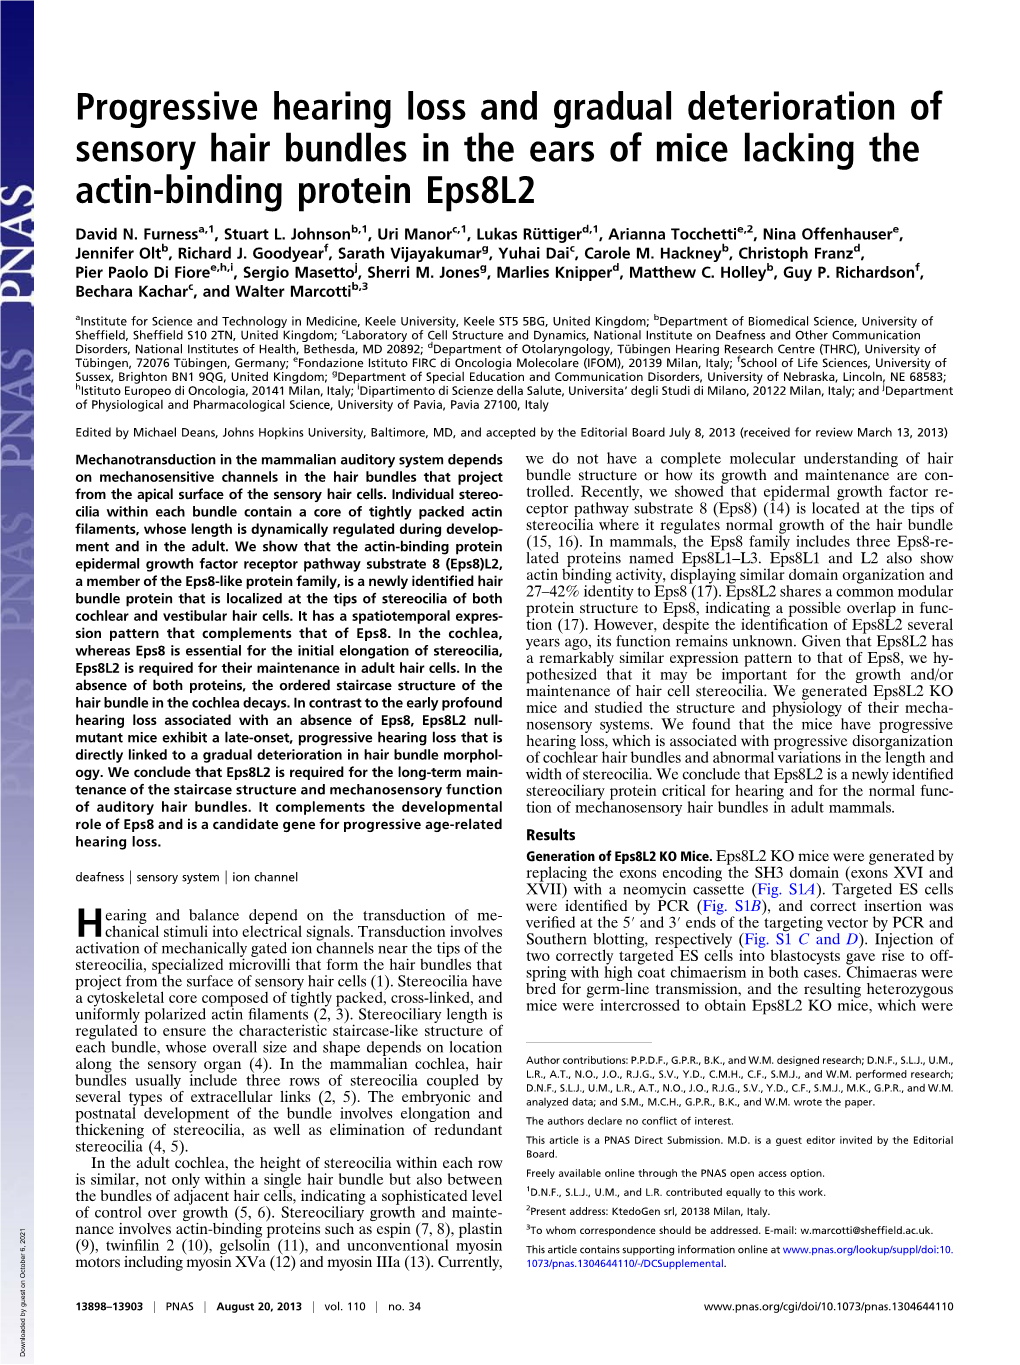 Progressive Hearing Loss and Gradual Deterioration of Sensory Hair Bundles in the Ears of Mice Lacking the Actin-Binding Protein Eps8l2